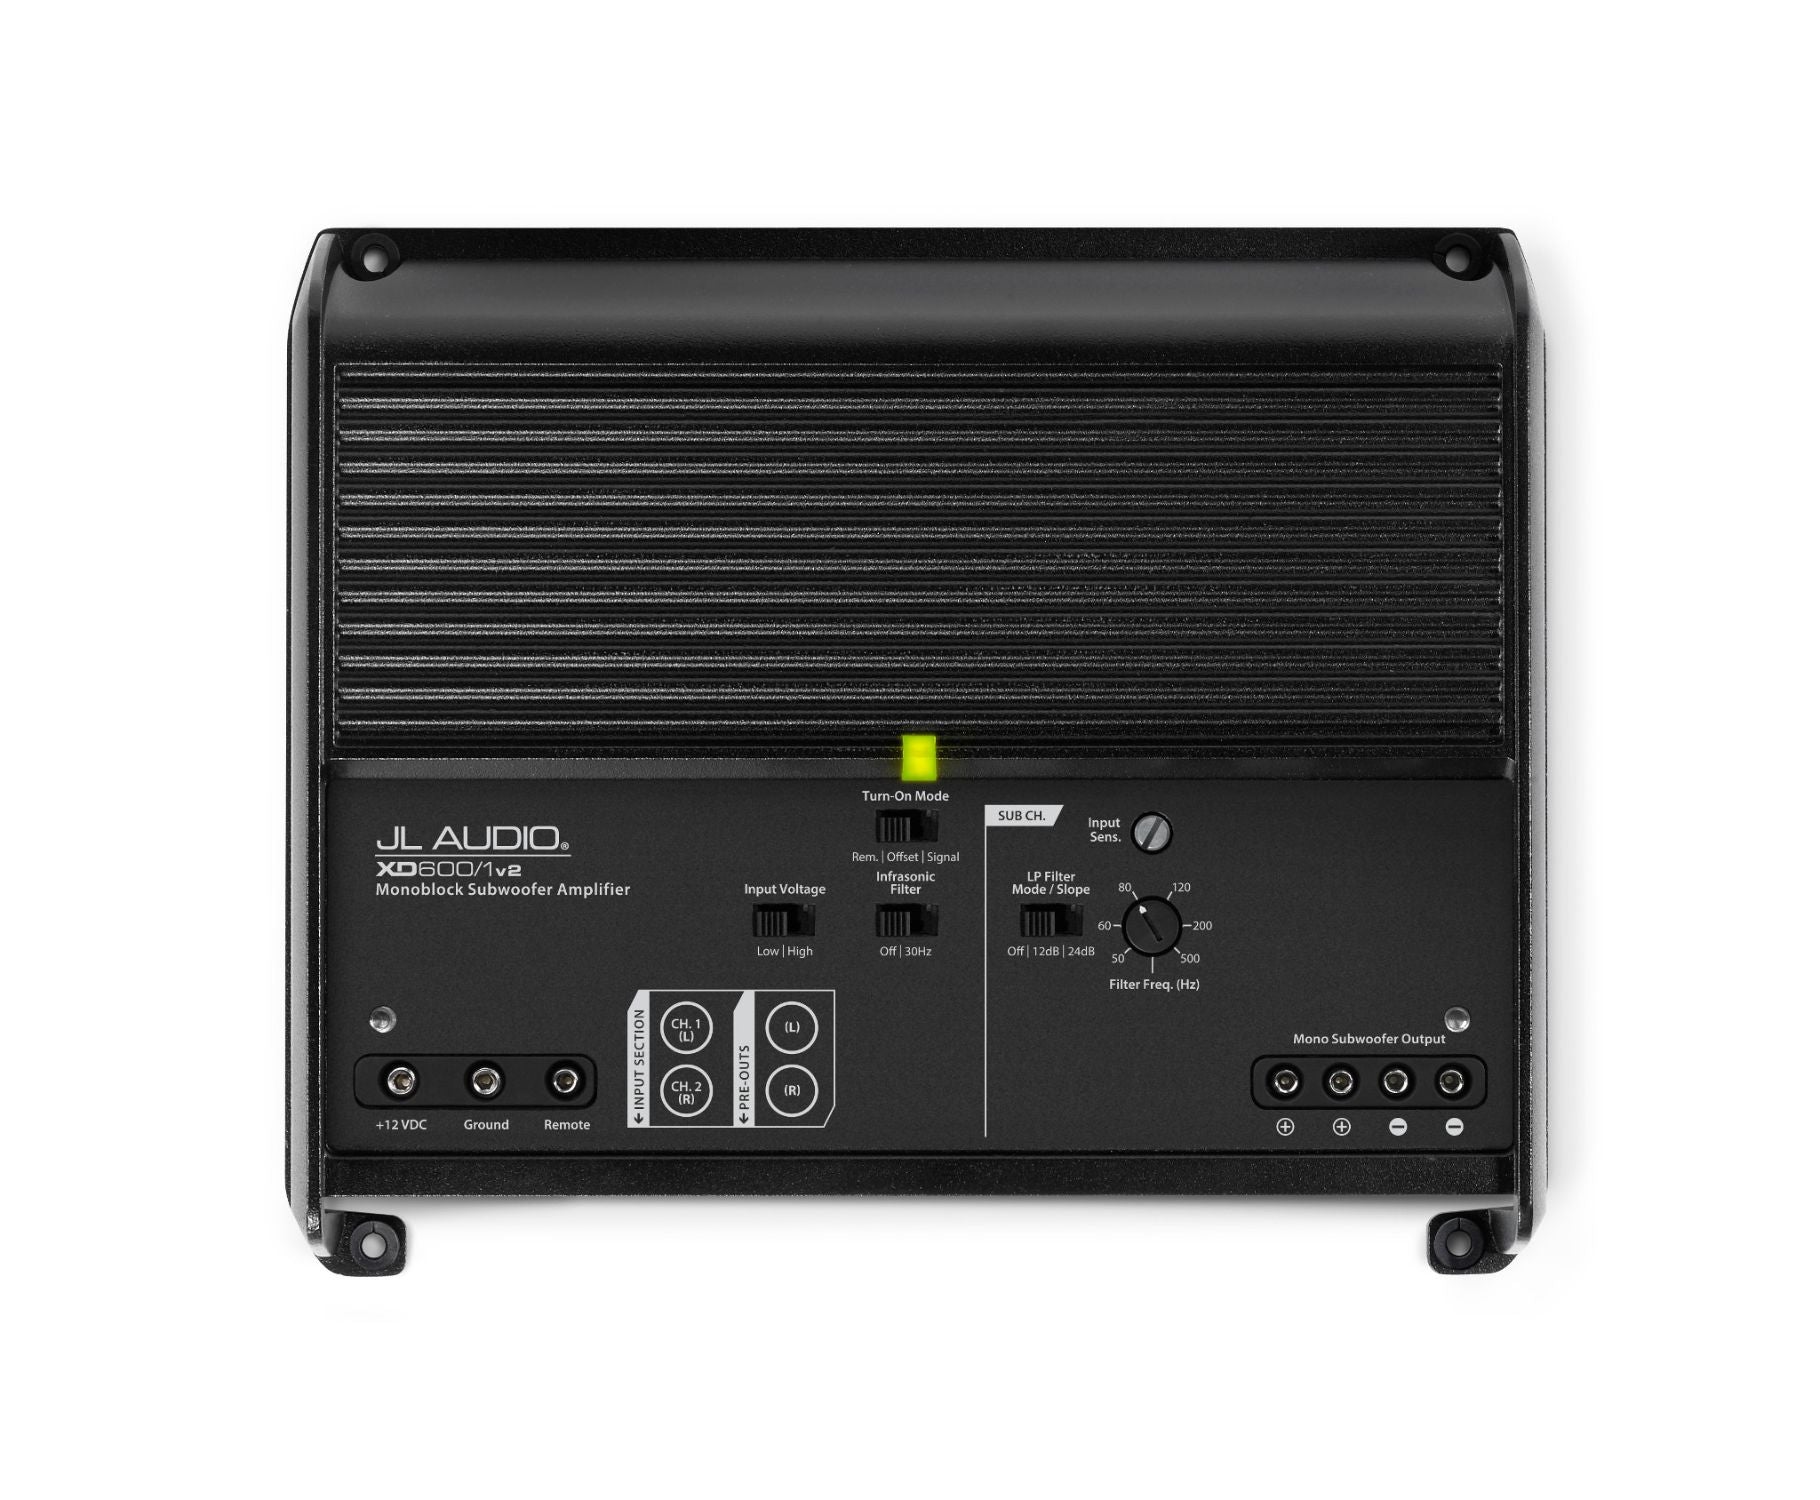 Front of XD600/1v2 Amplifier Overhead showing Control Panel